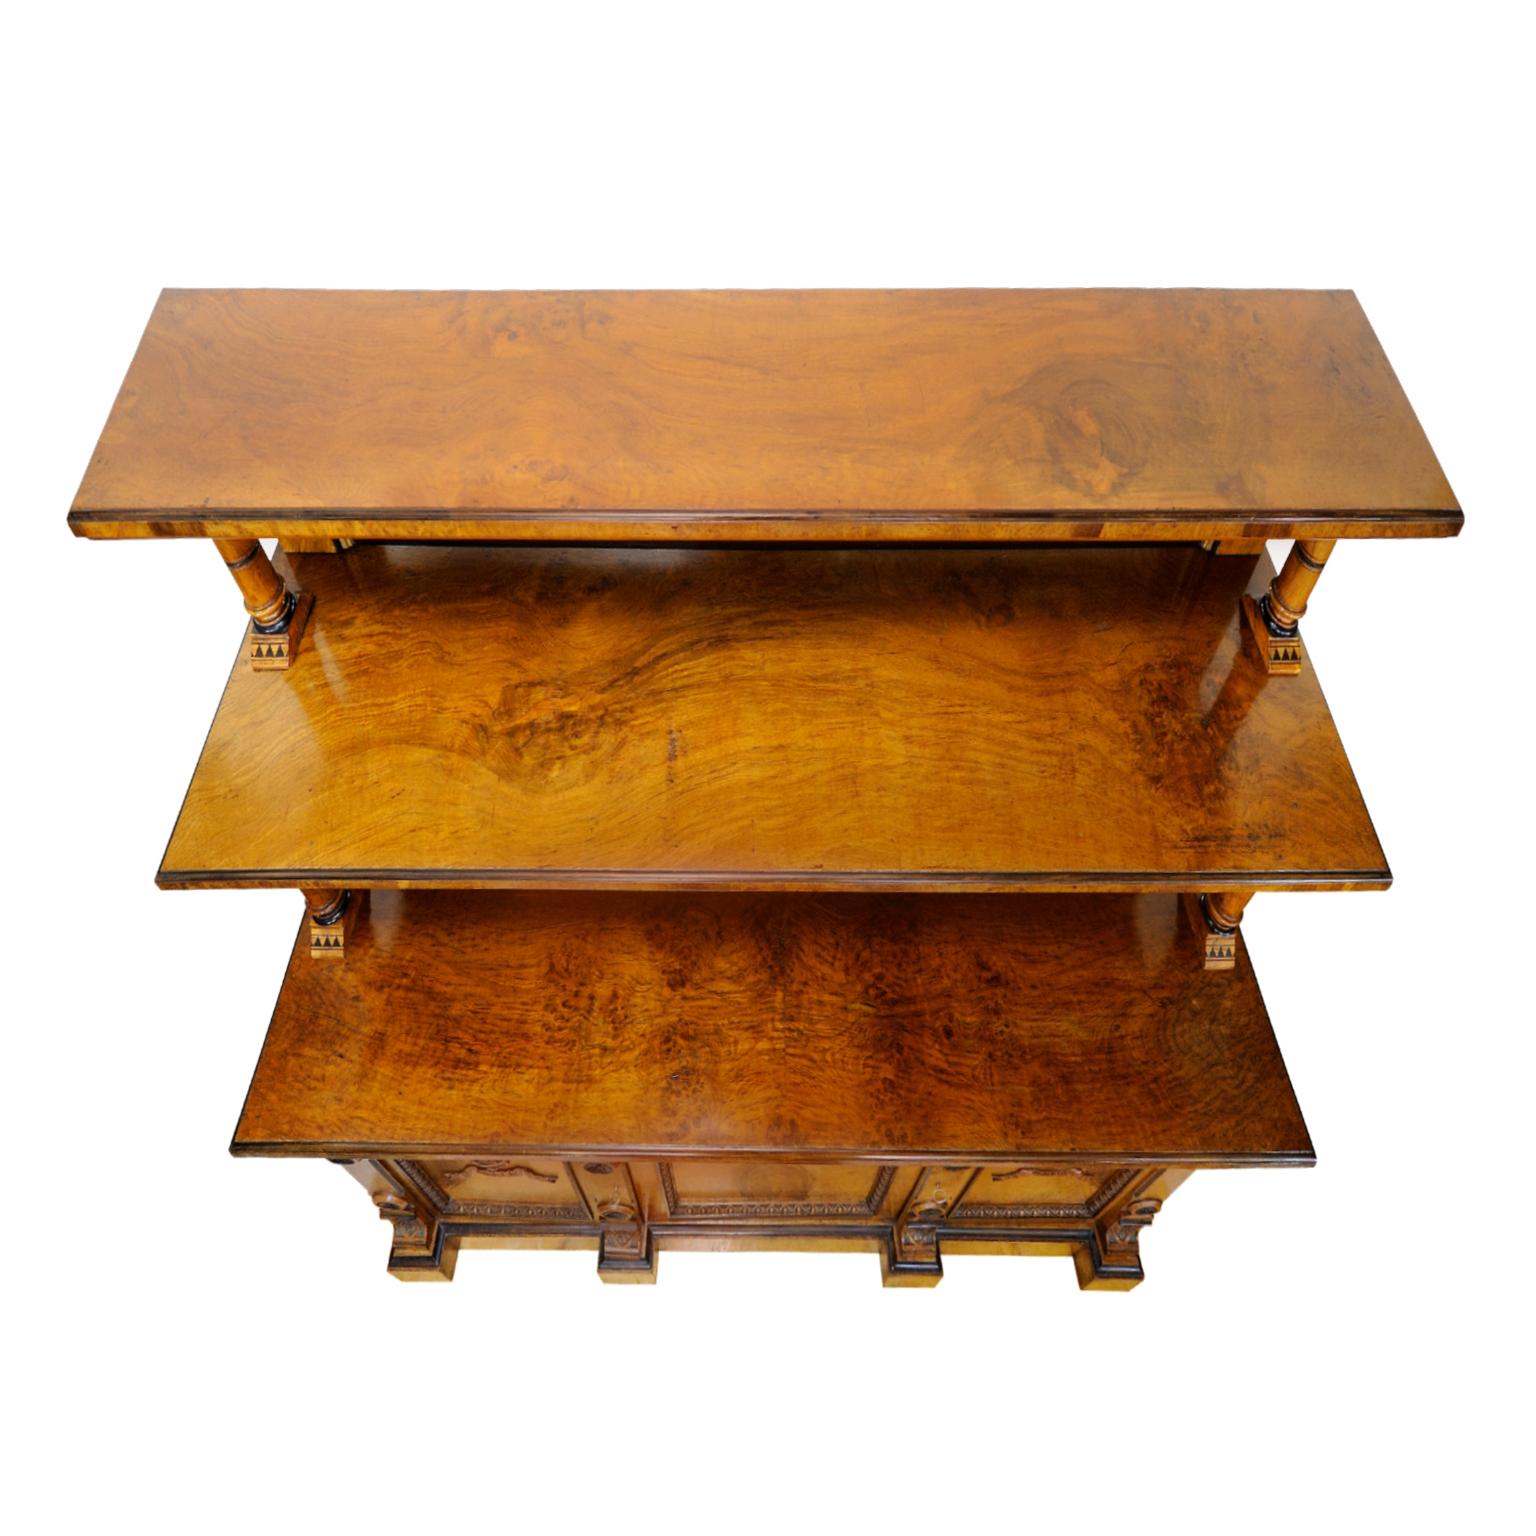 This is an extremely impressive Arts and Crafts burr oak serving table/cabinet with black ebony detailing and complete mirrored back panel.

The interior consists of three separate fully shelved compartments. A top quality cabinet, possibly by